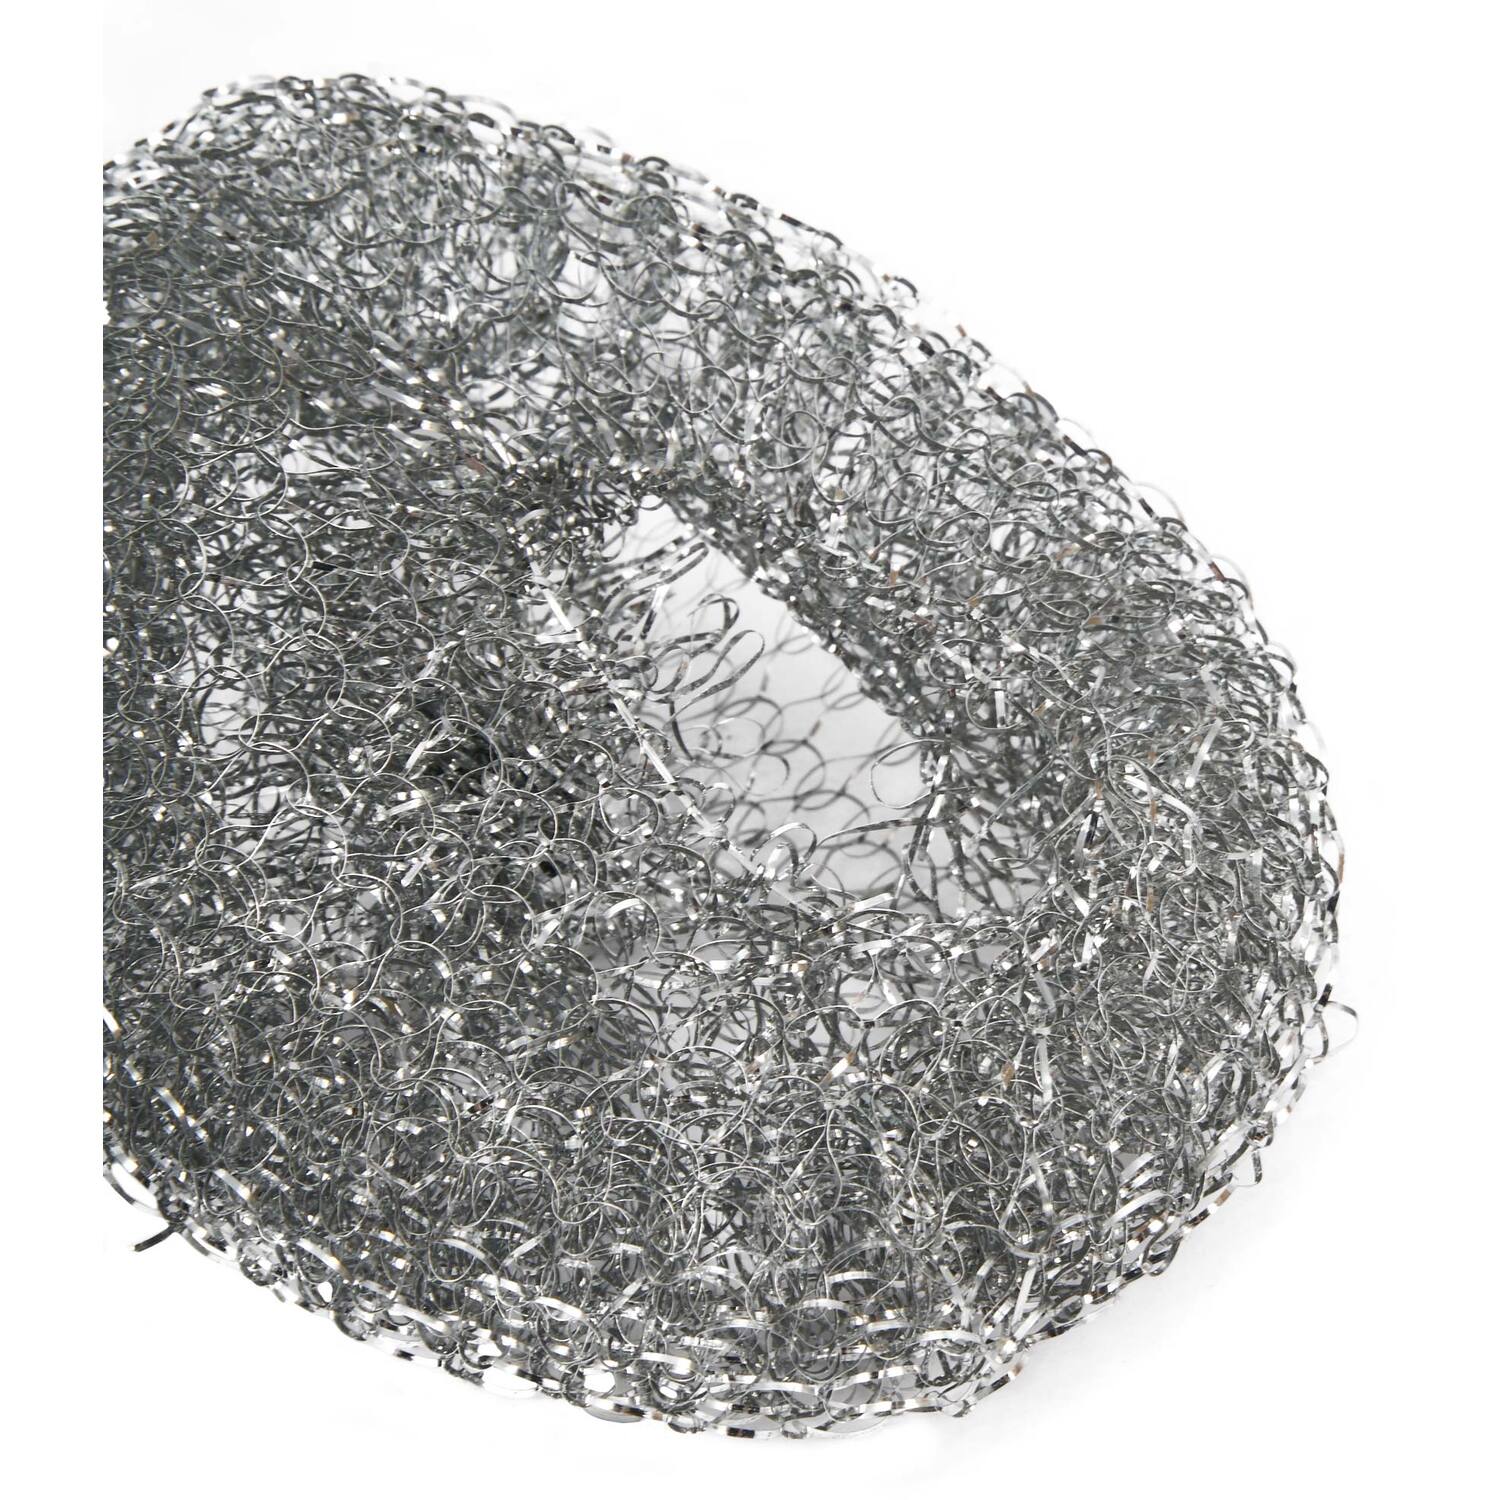 Pack of 5 Zinc Coated Dish Scourers Image 2